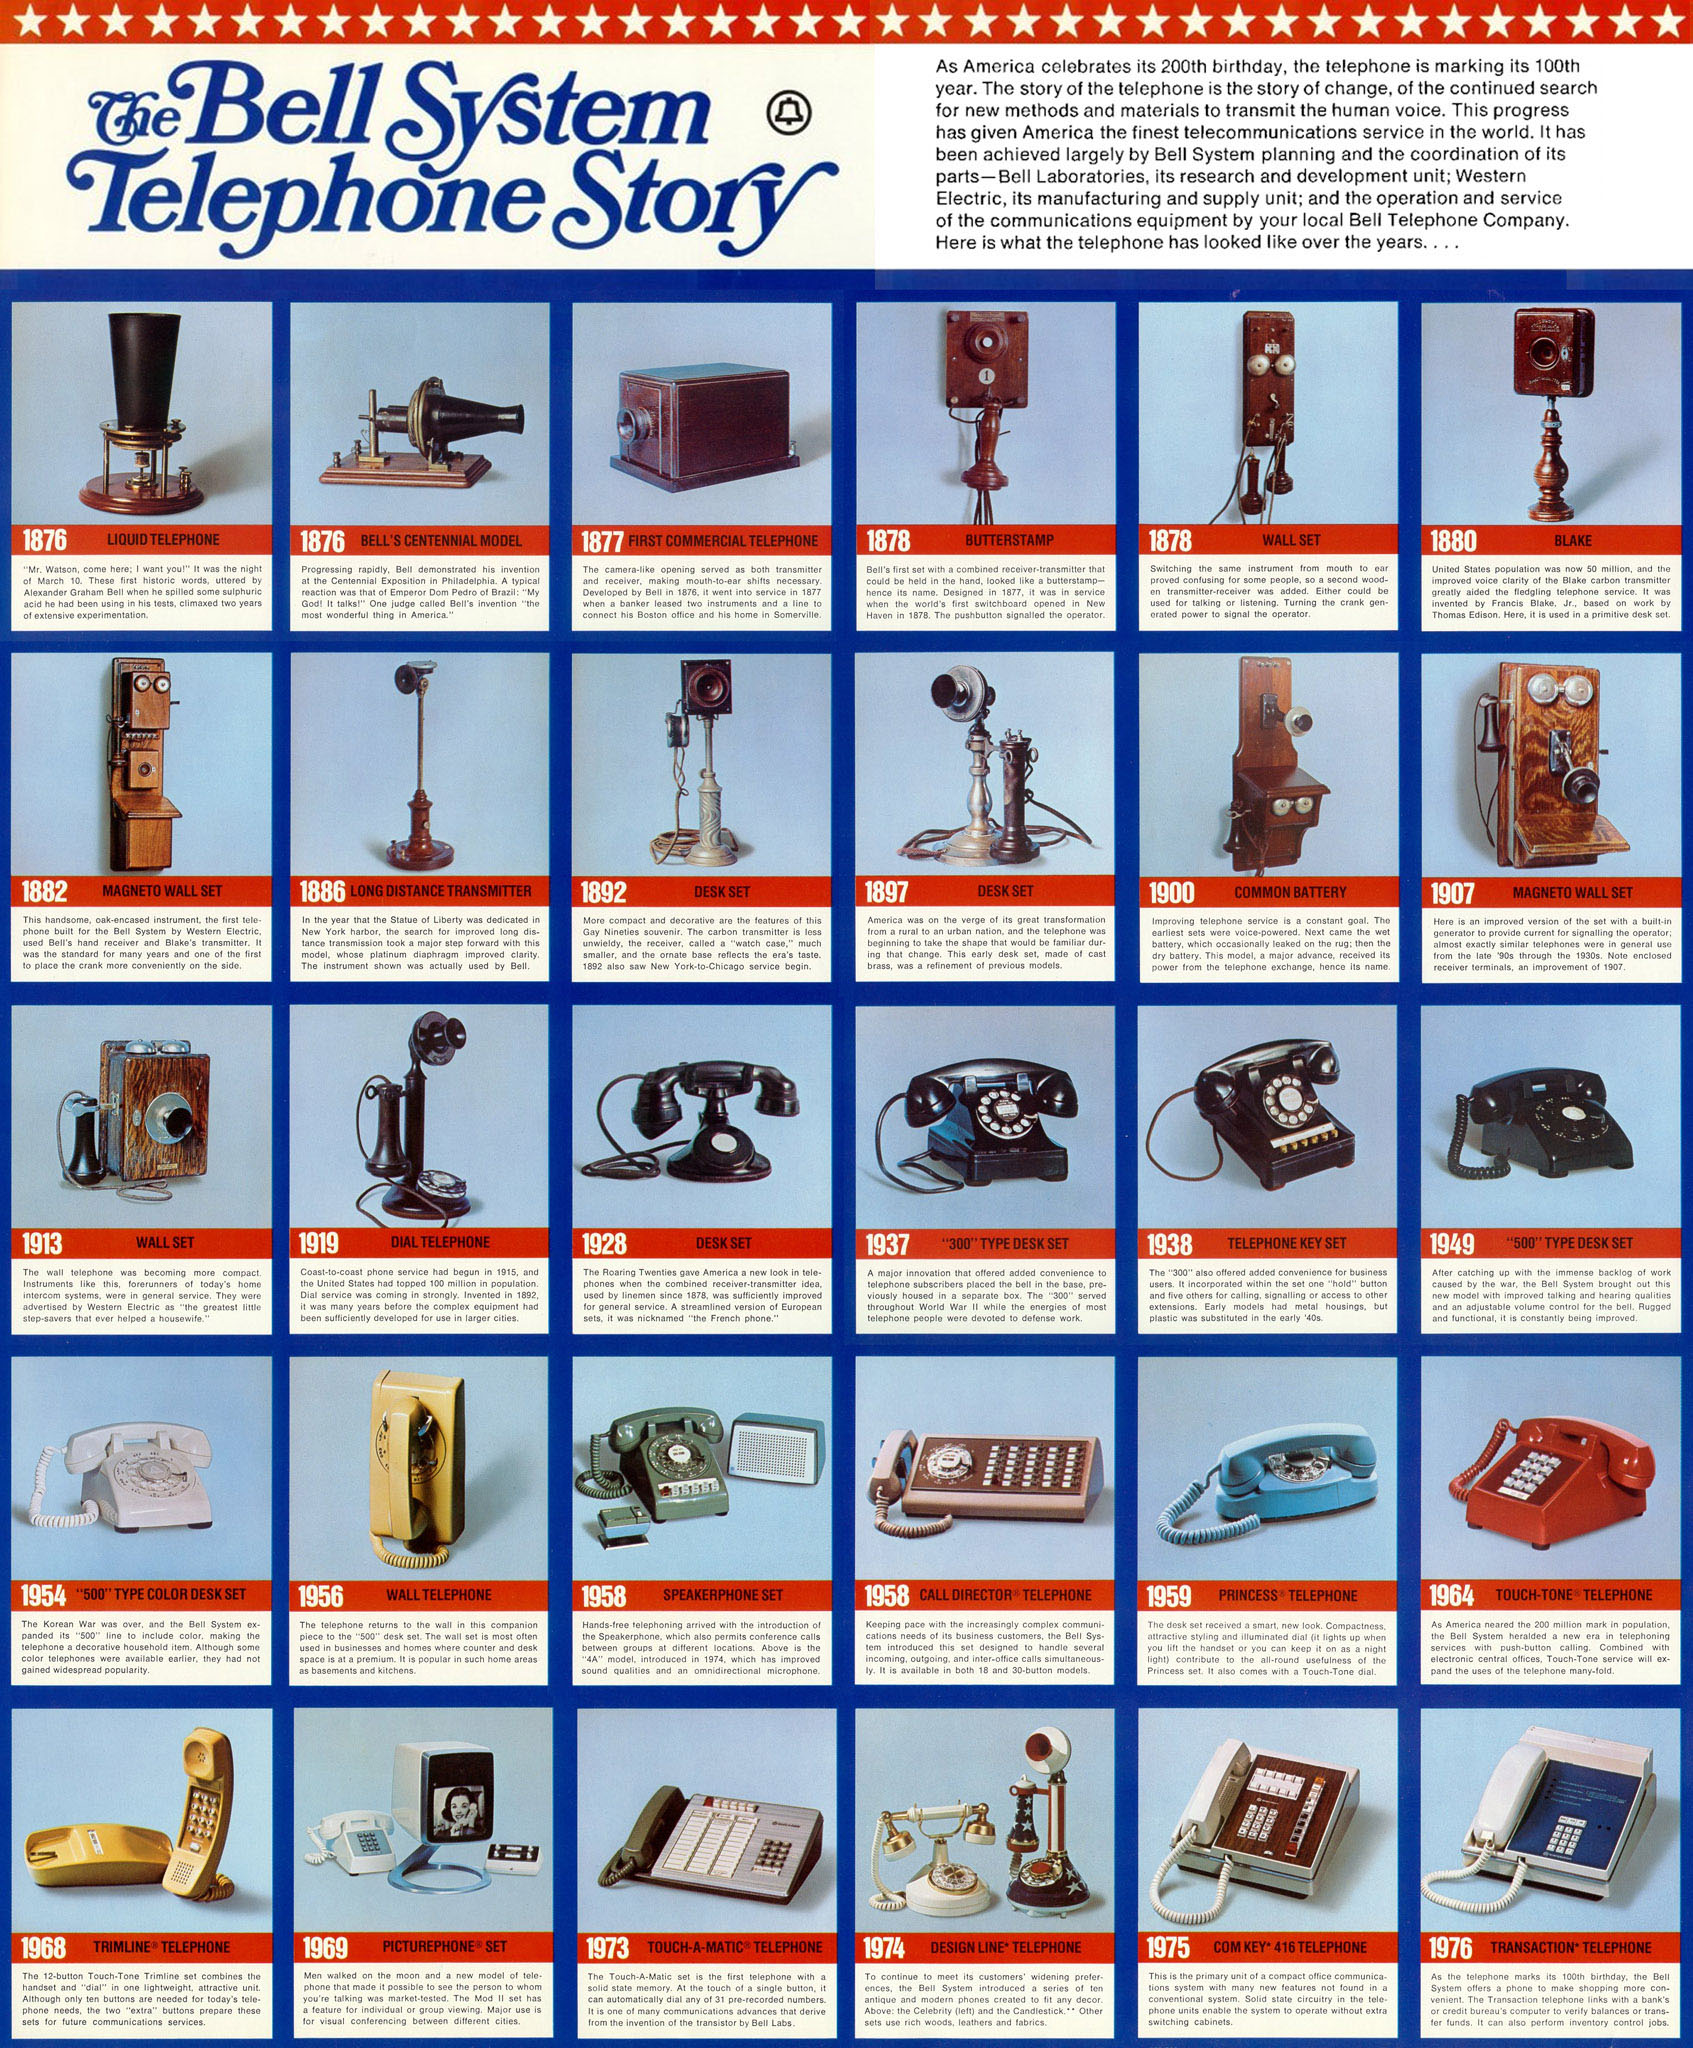 telephone models by year